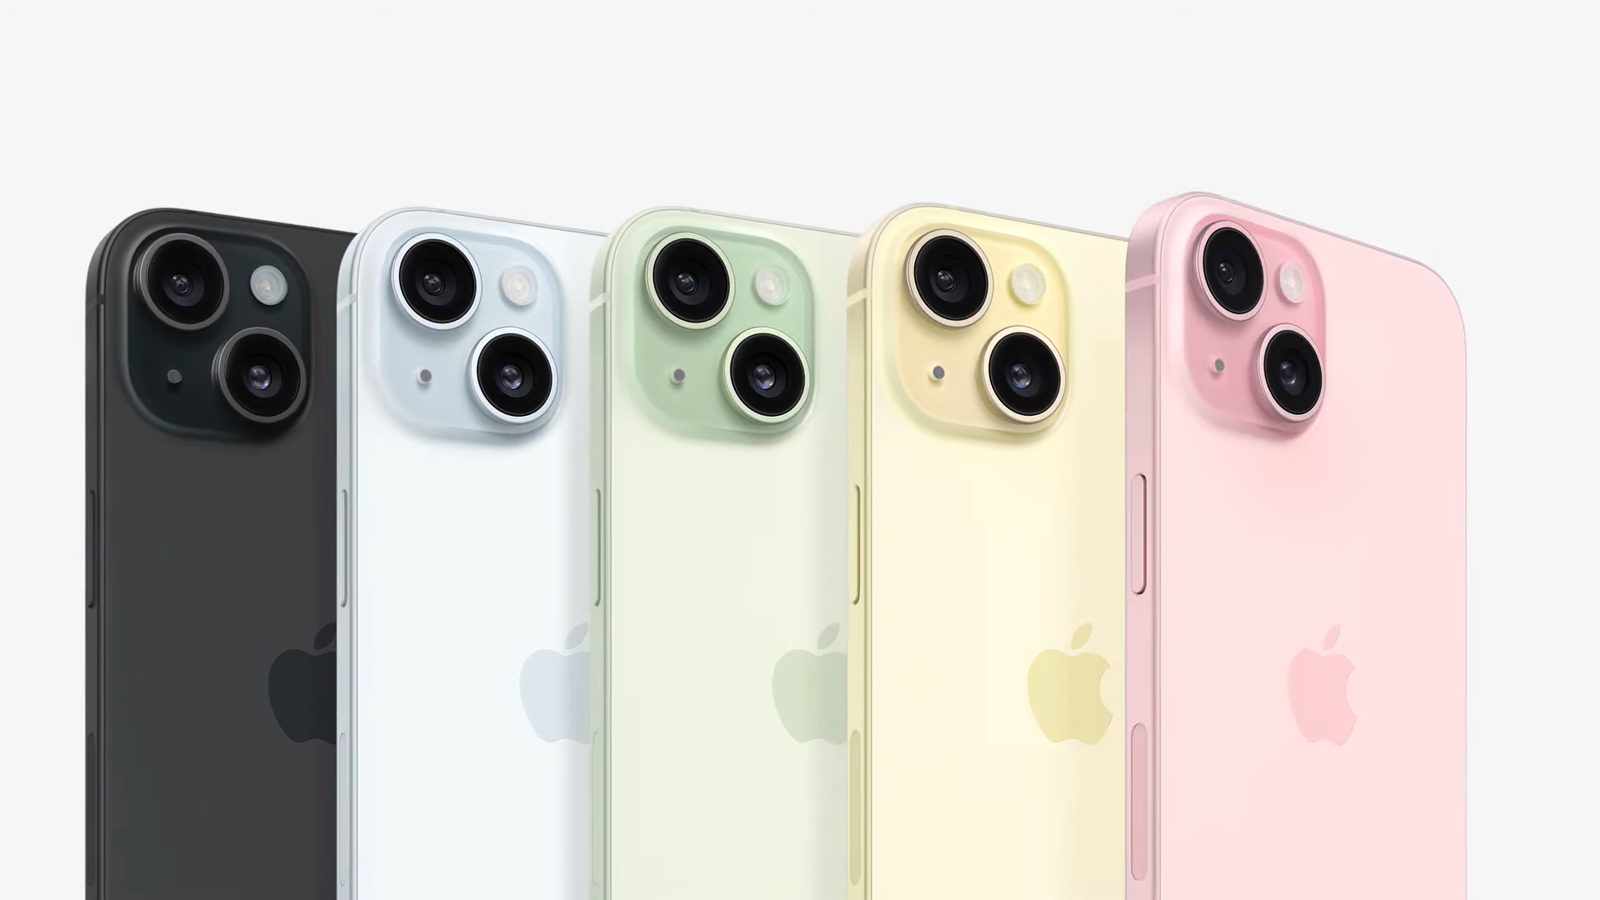 iPhone 15 Series began last week, with the device going on sale on September 12 at Apple's Wanderlust event.